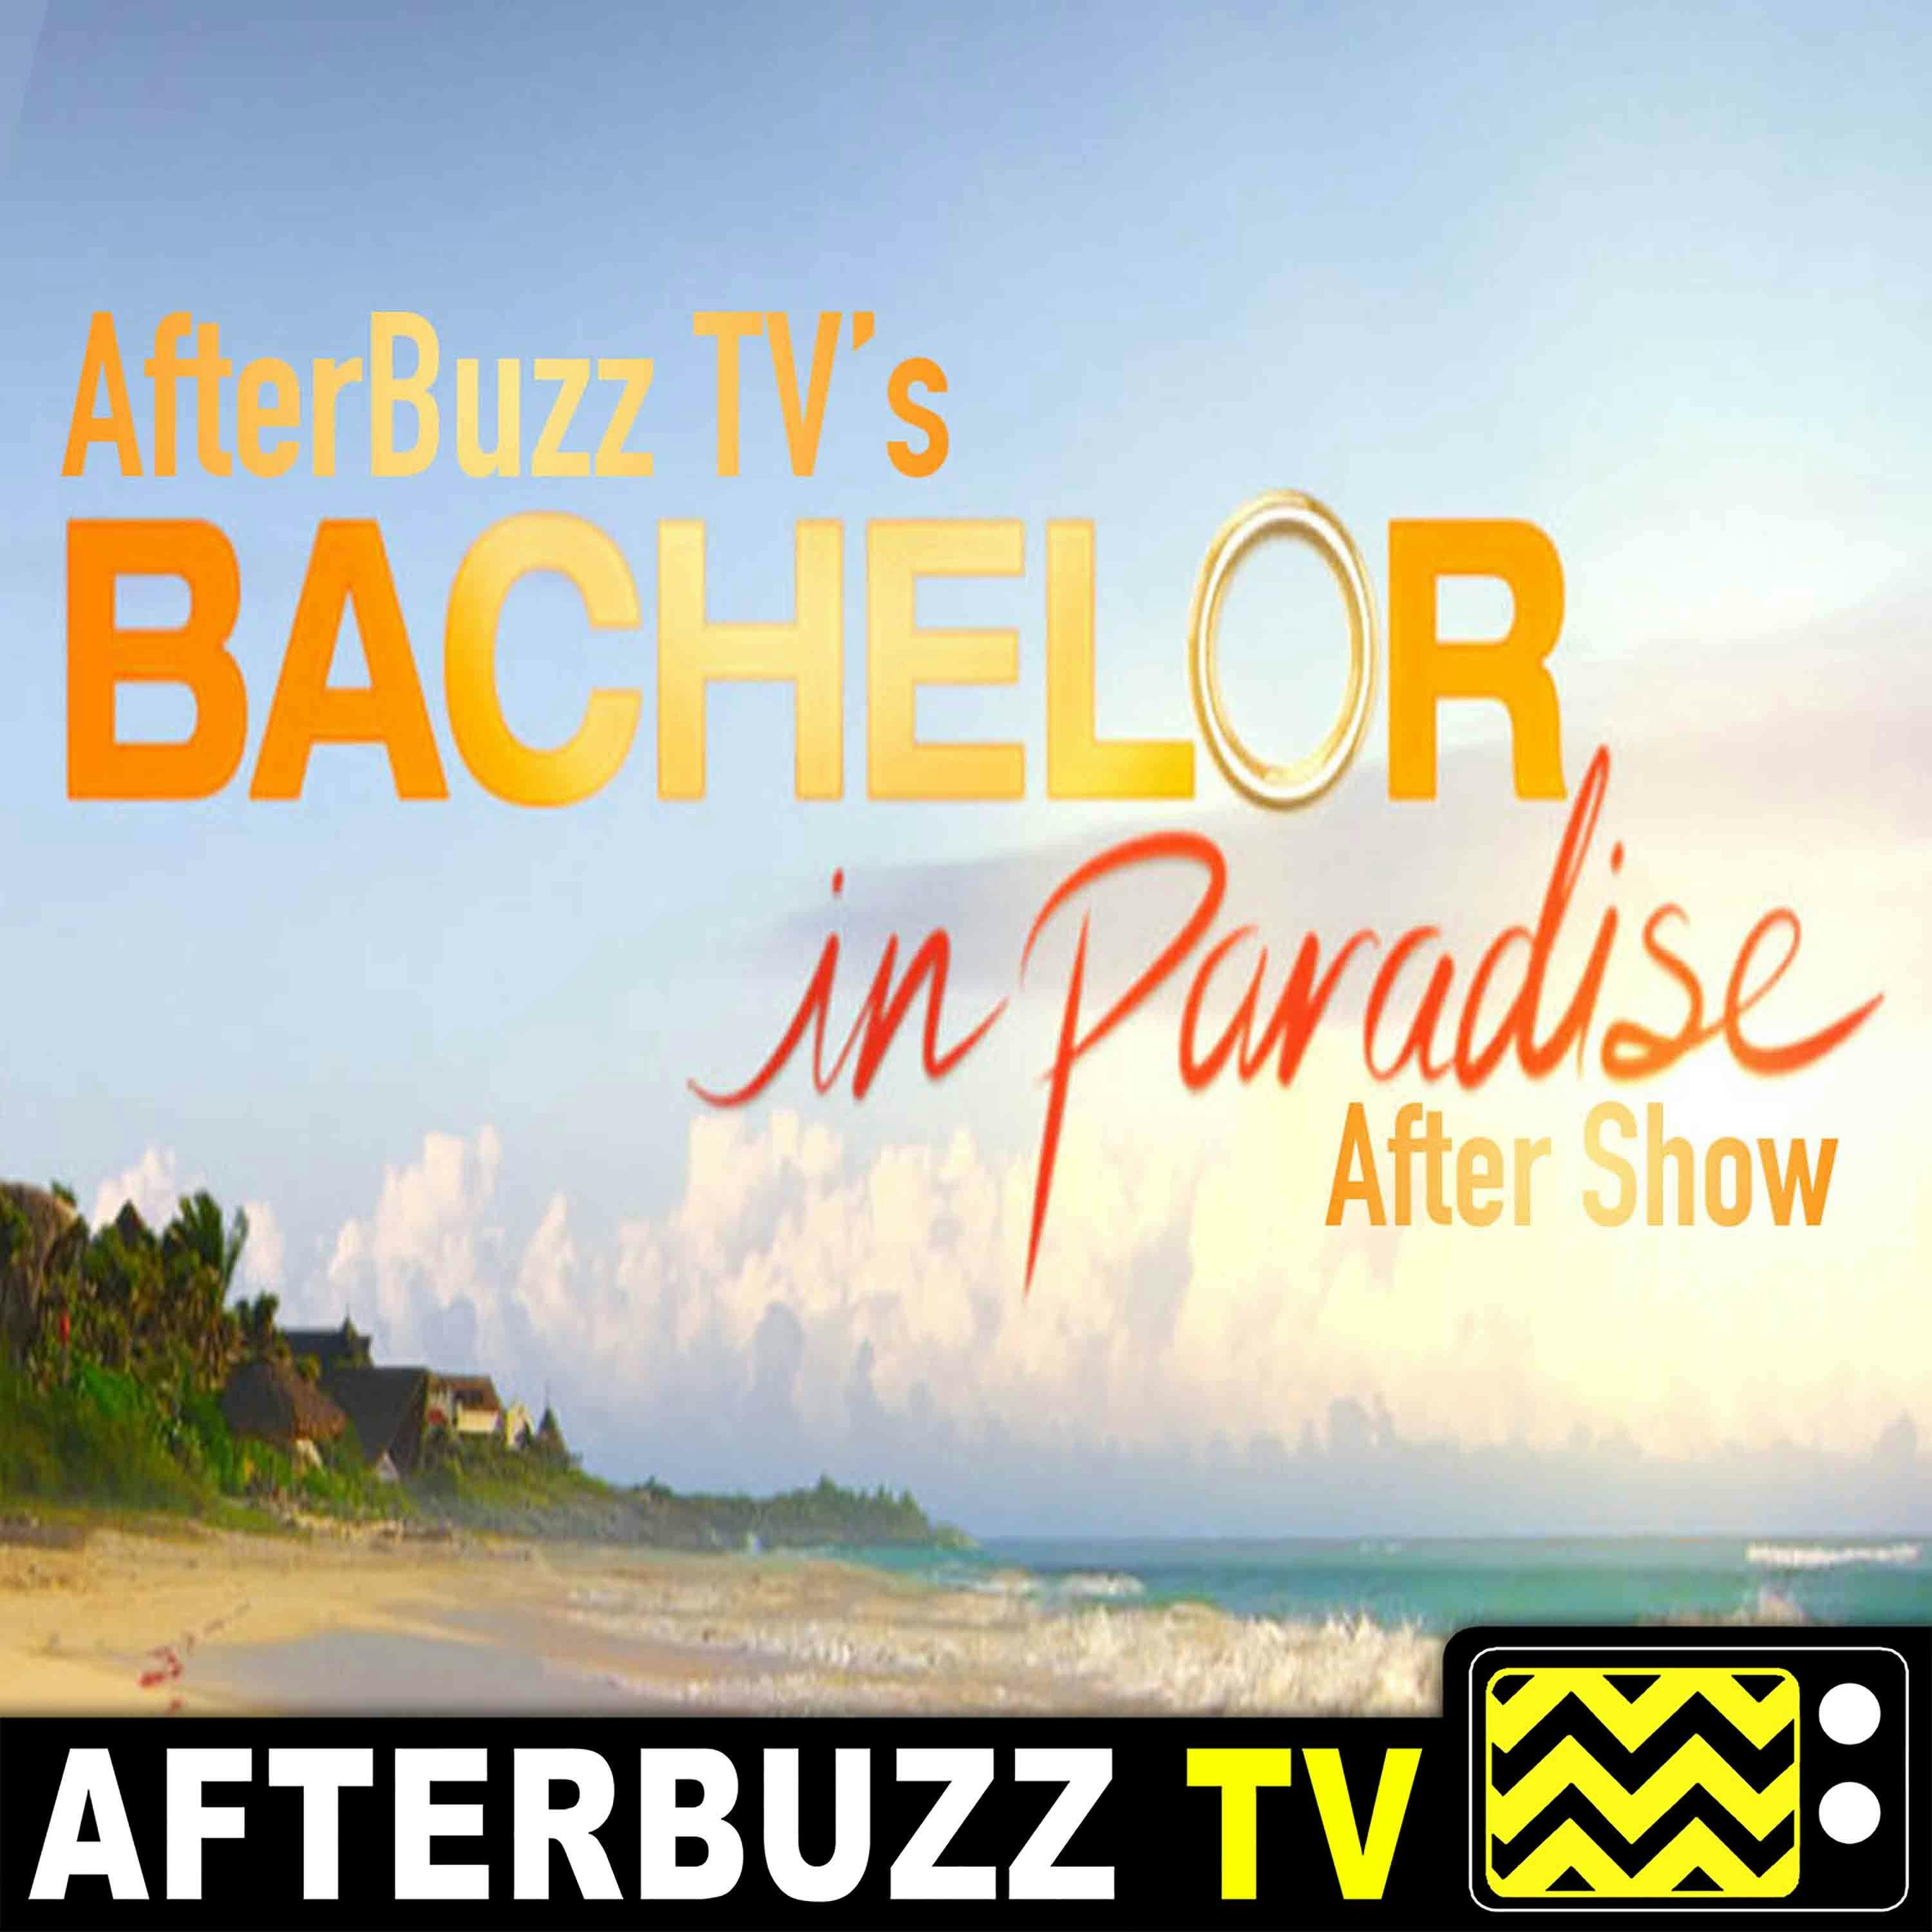 Bachelor In Paradise S:3 | Sarah Herron Guests on Episode 2 | AfterBuzz TV AfterShow